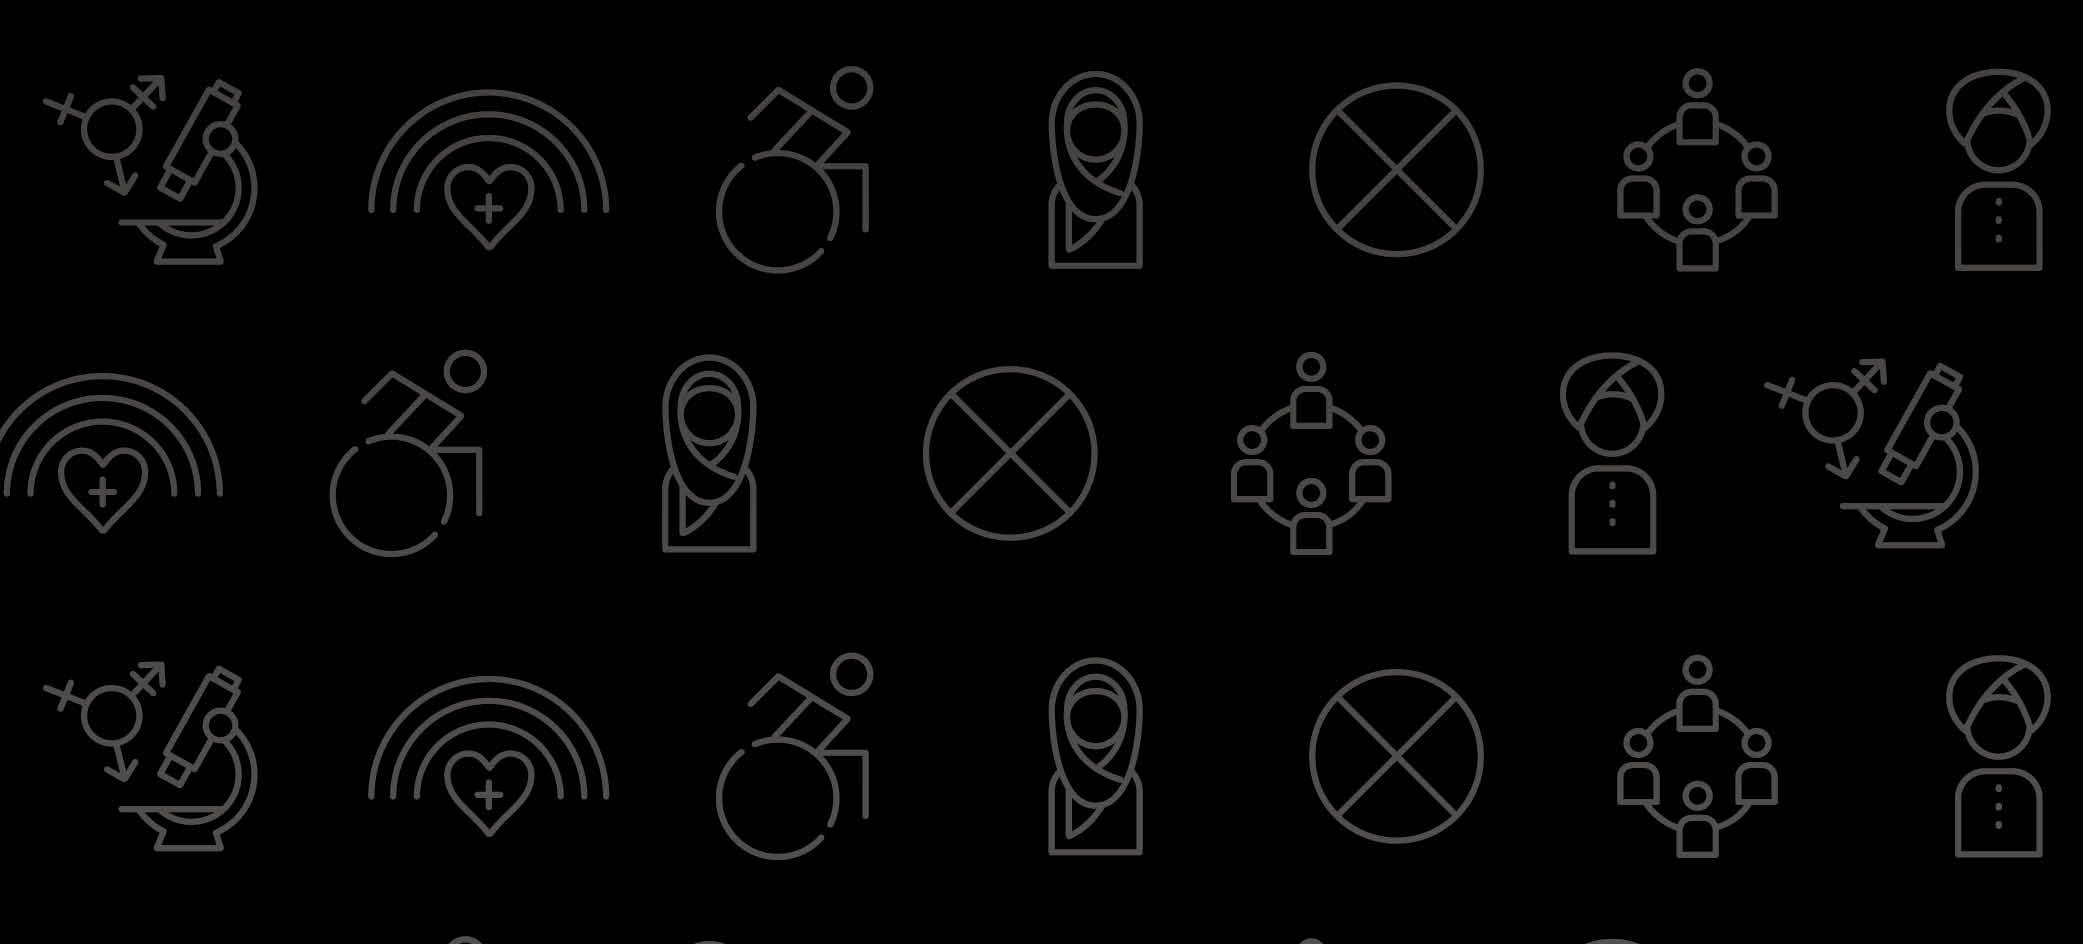 Icons of a microscope, rainbow with a heart underneath, person in a wheelchair, person in a hijab, a circle with an X, four people connected by a circle, and person wearing a turban. The pattern repeats in three rows.